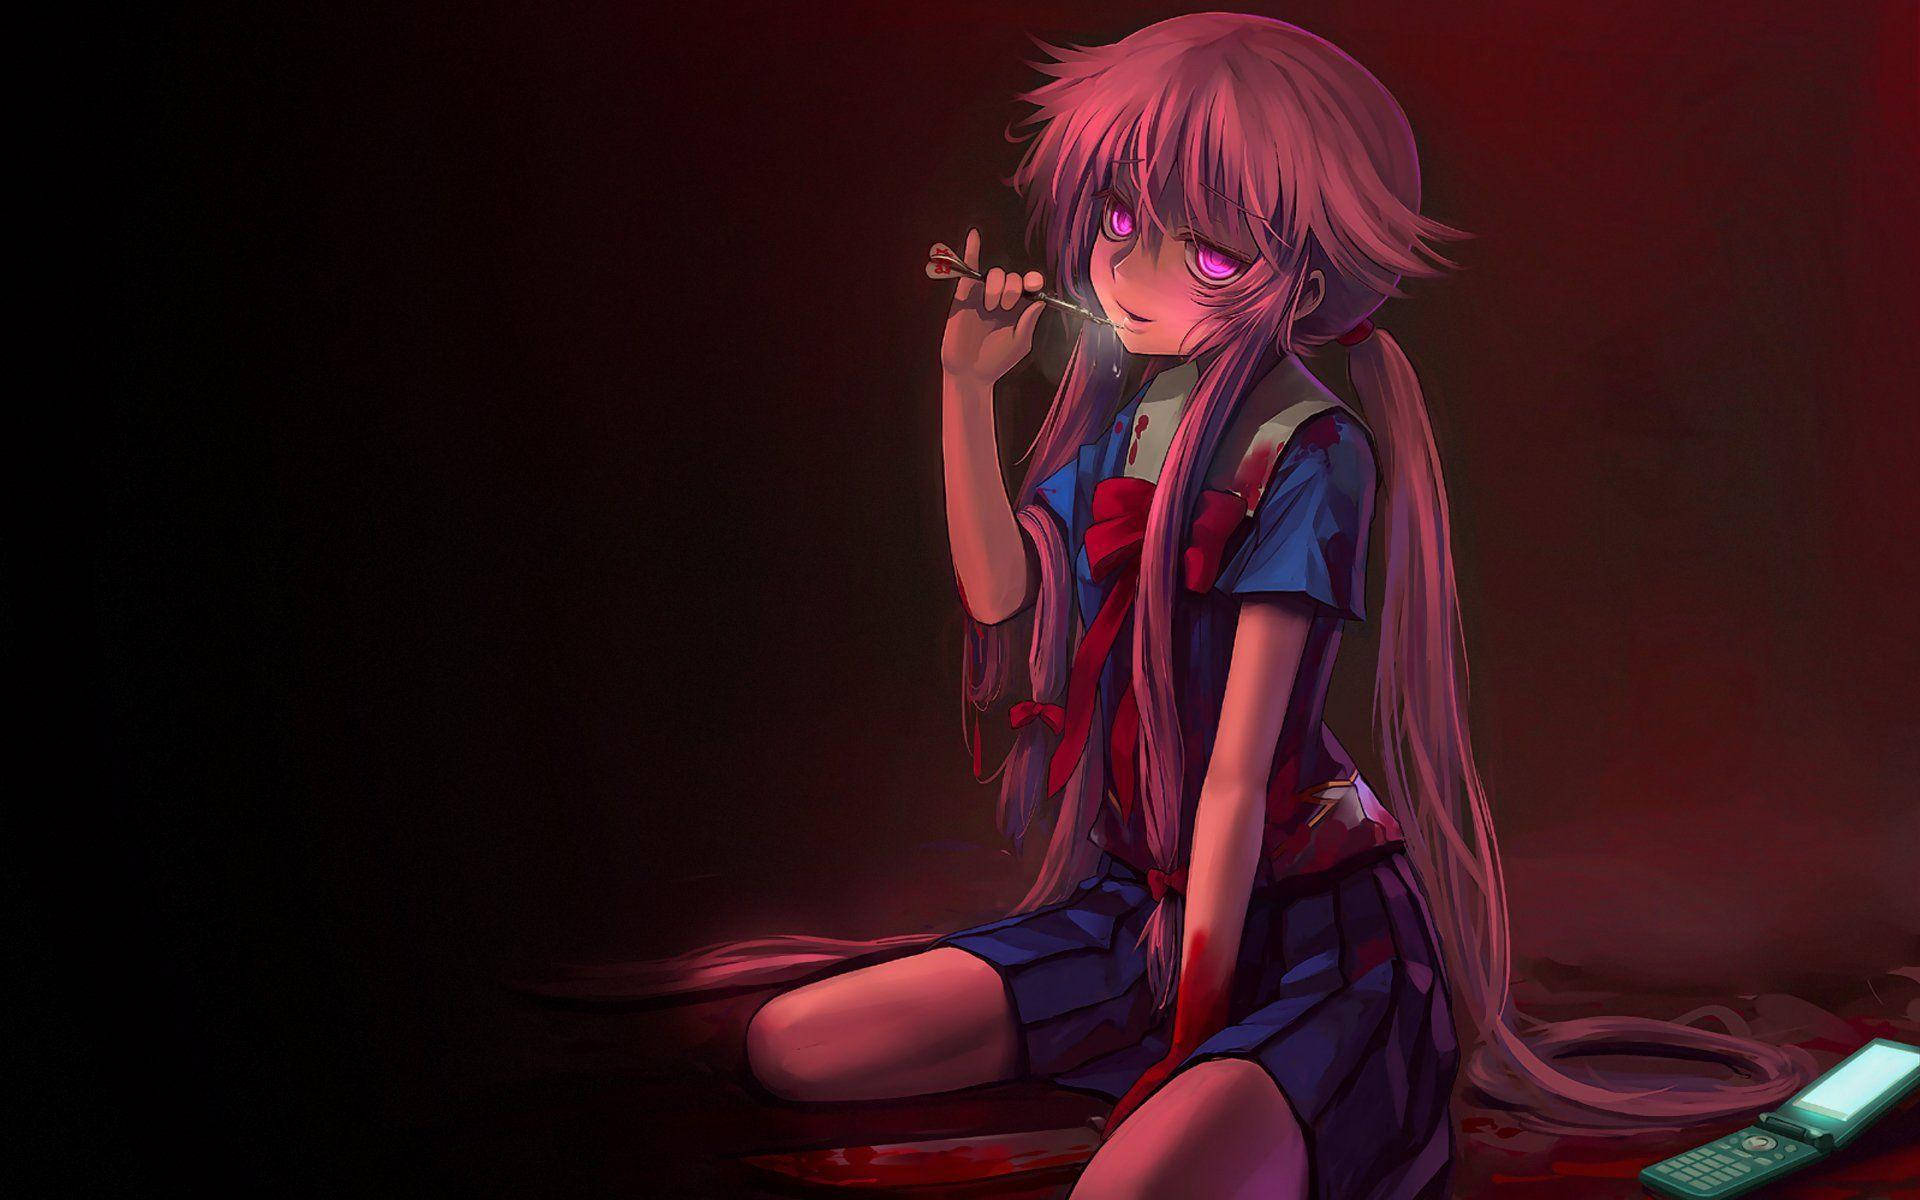 Yuno from Future Diary with glowing eyes in the dark Wallpaper